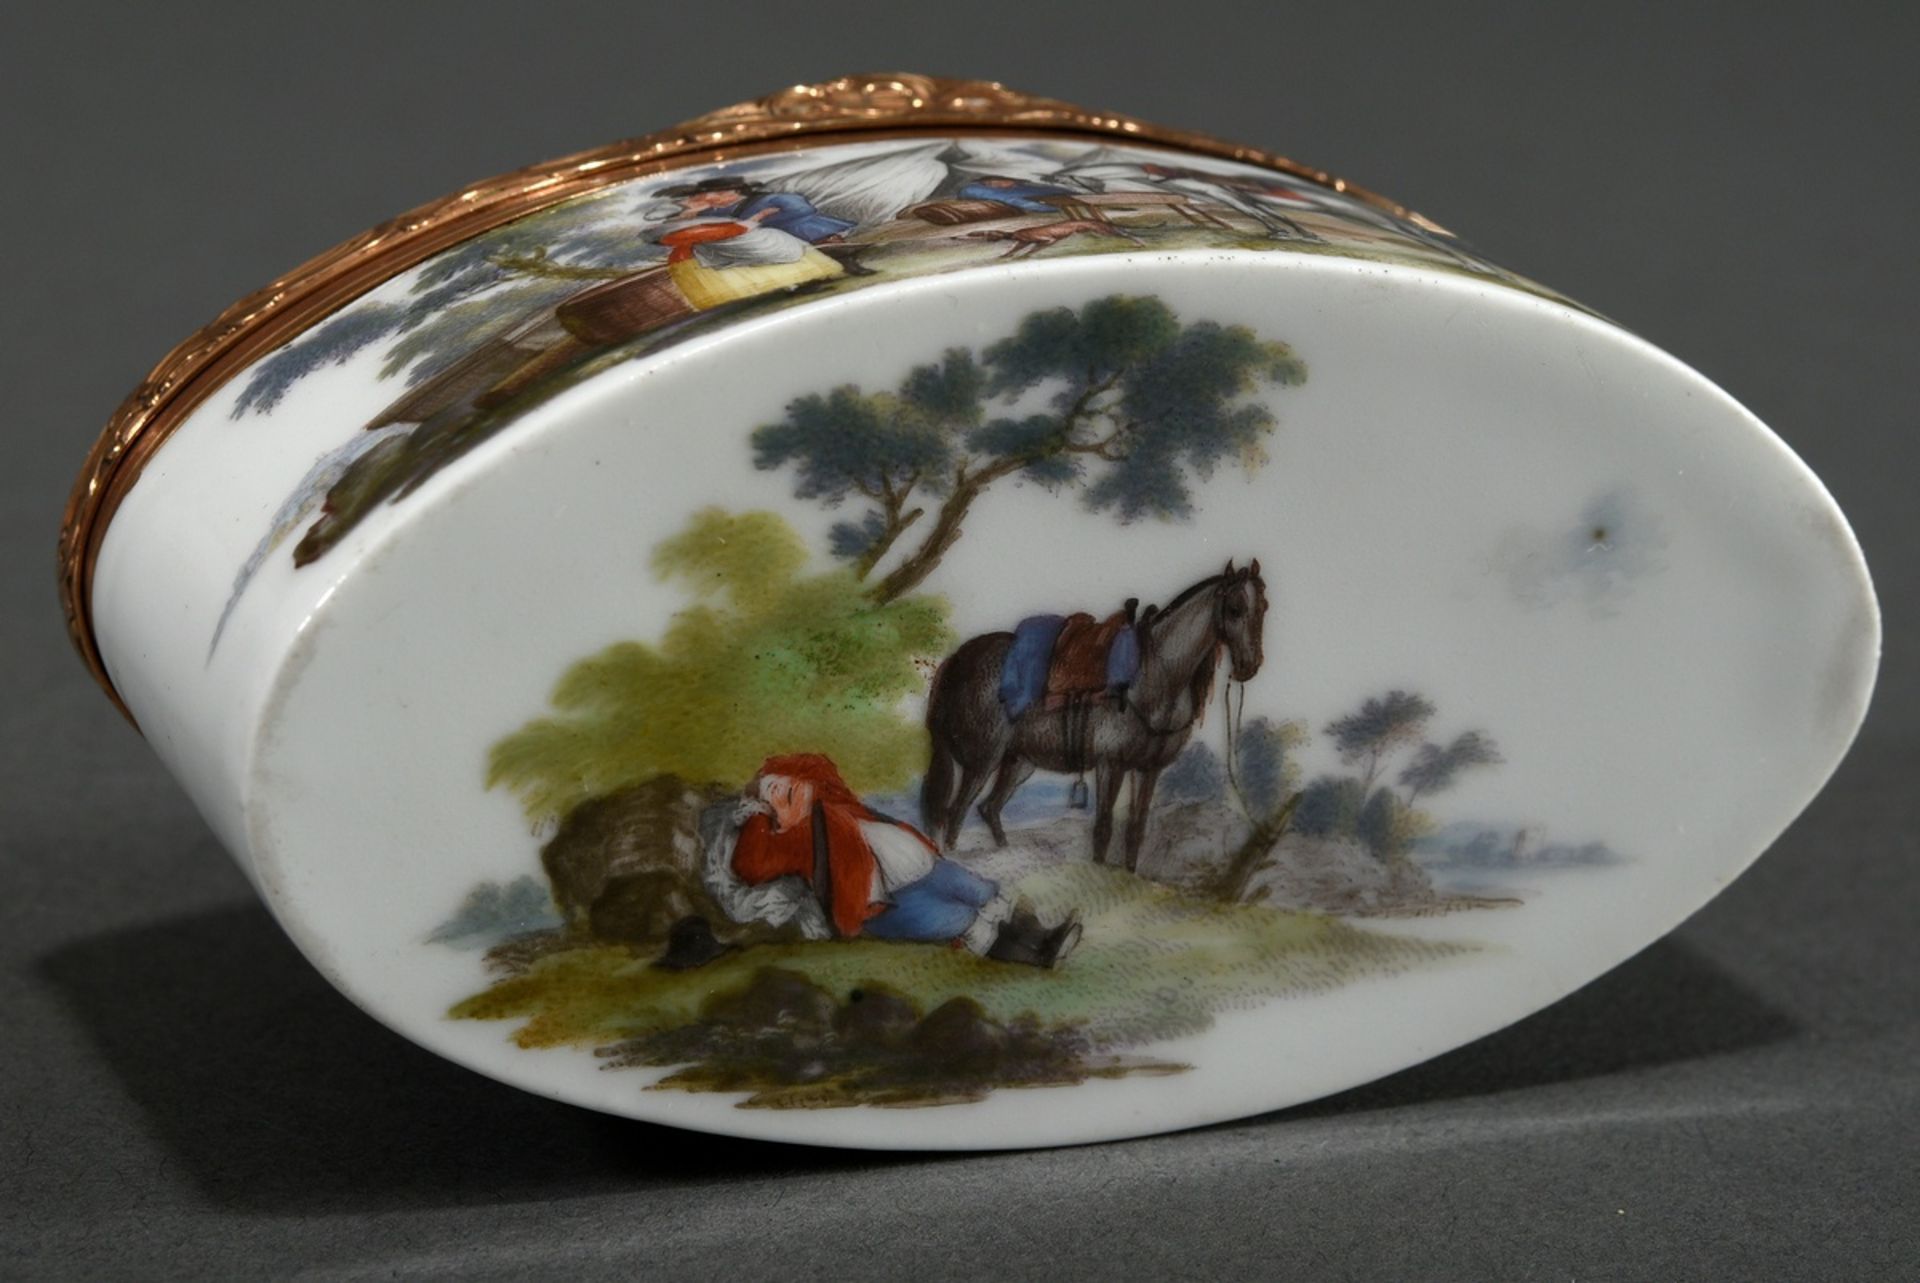 Oblong Höchst porcelain snuff box with floral engraved gold mount and delicate painting on the outs - Image 7 of 8